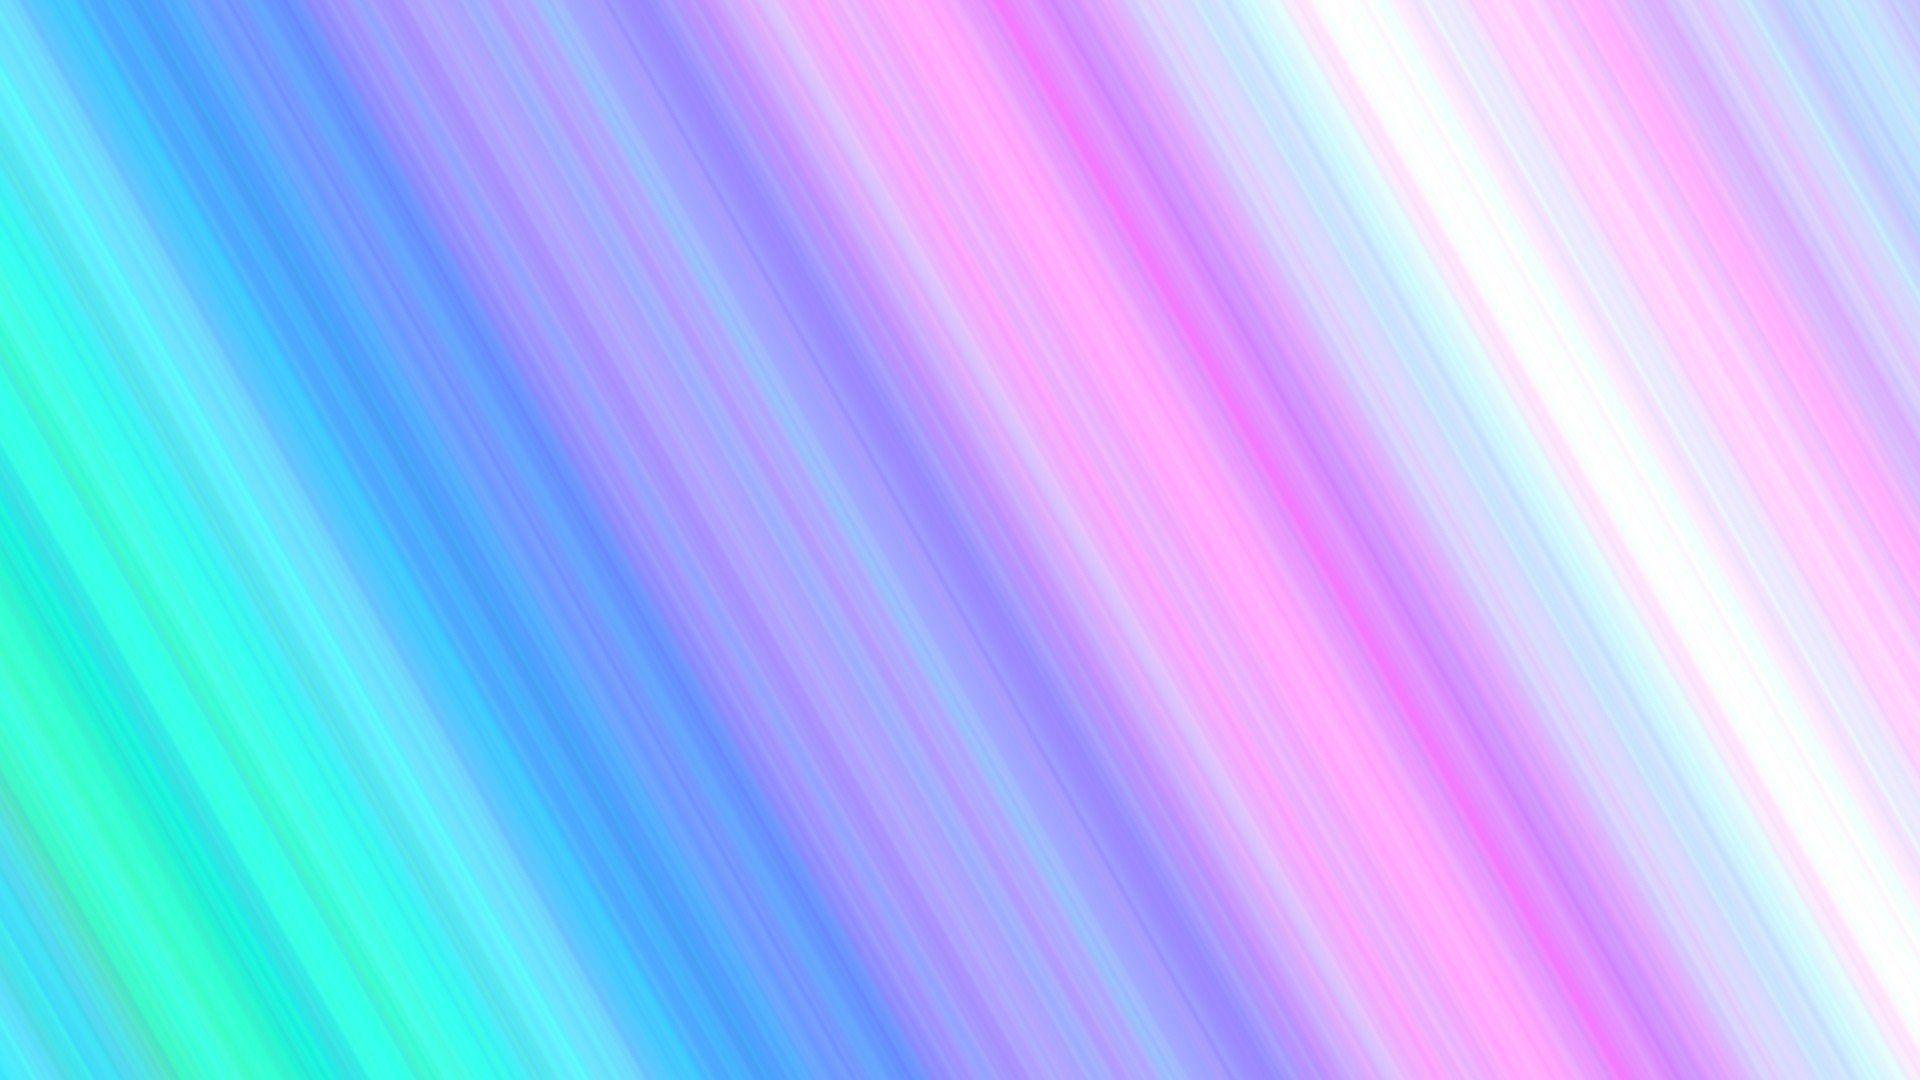 Wallpaper For > Purple And Pink Wallpaper